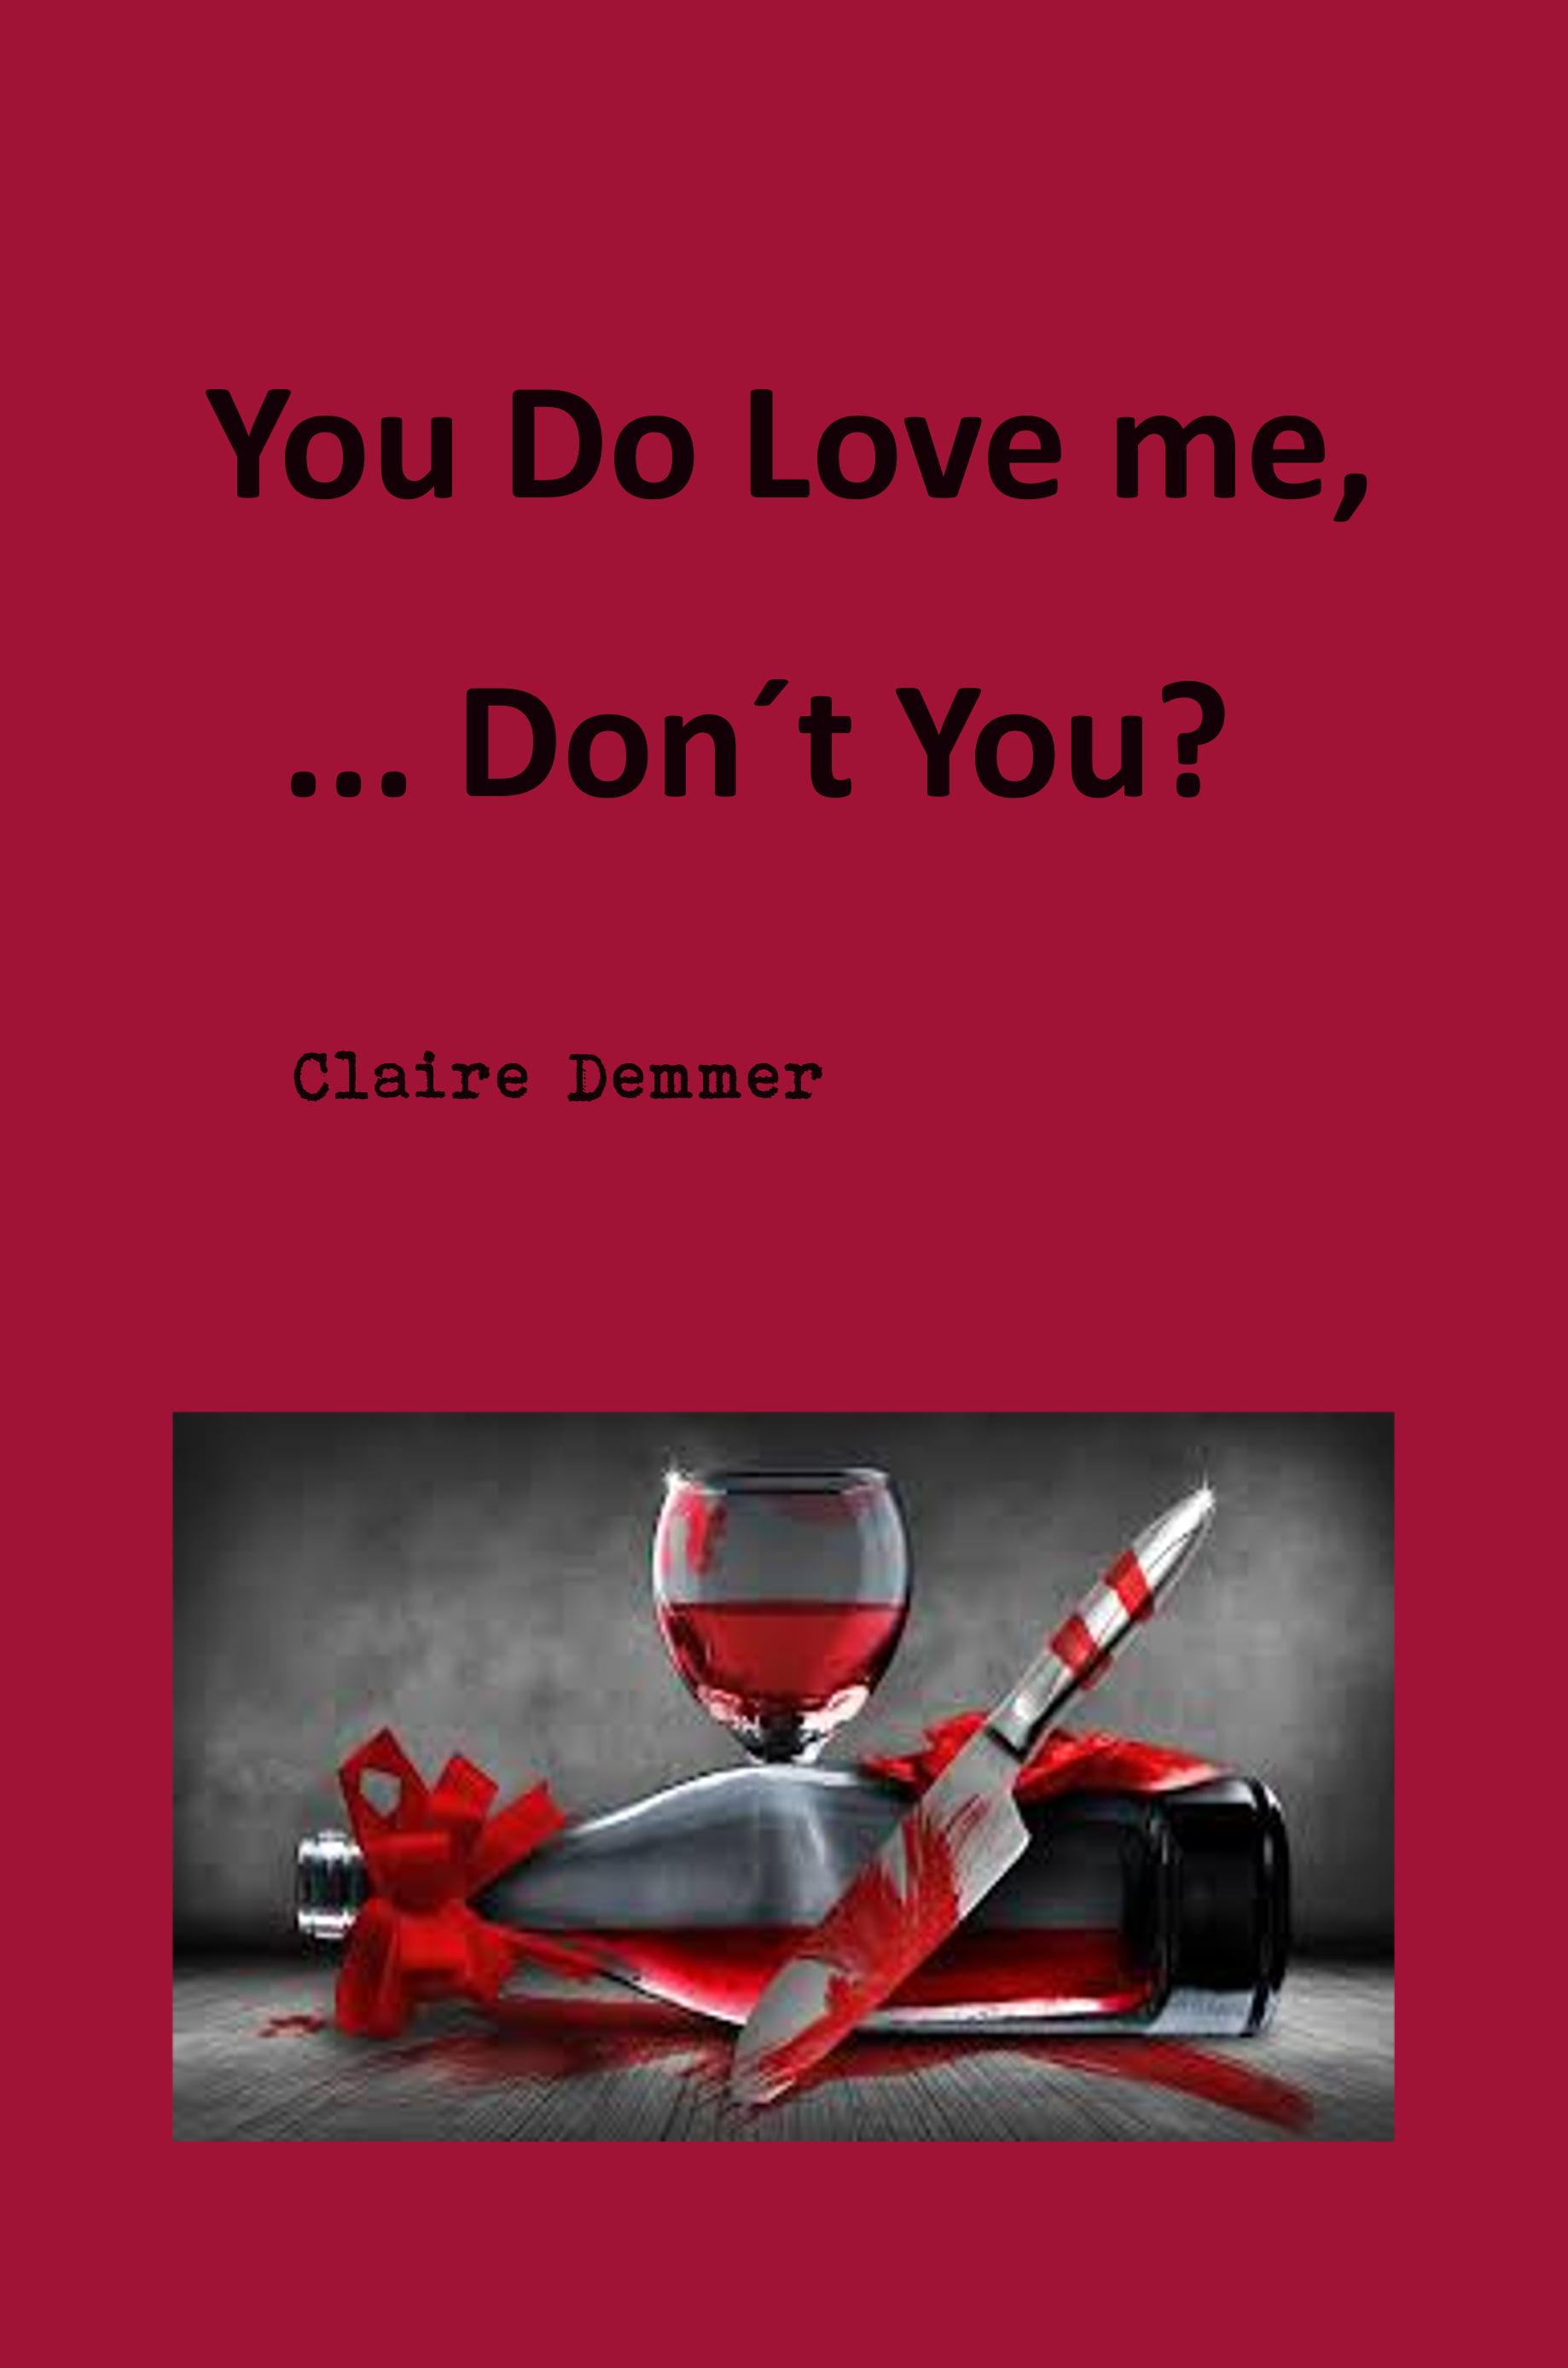 You do love me, don't you? A Scary Psycho Thriller in One Act - scary plays (Printed Script)